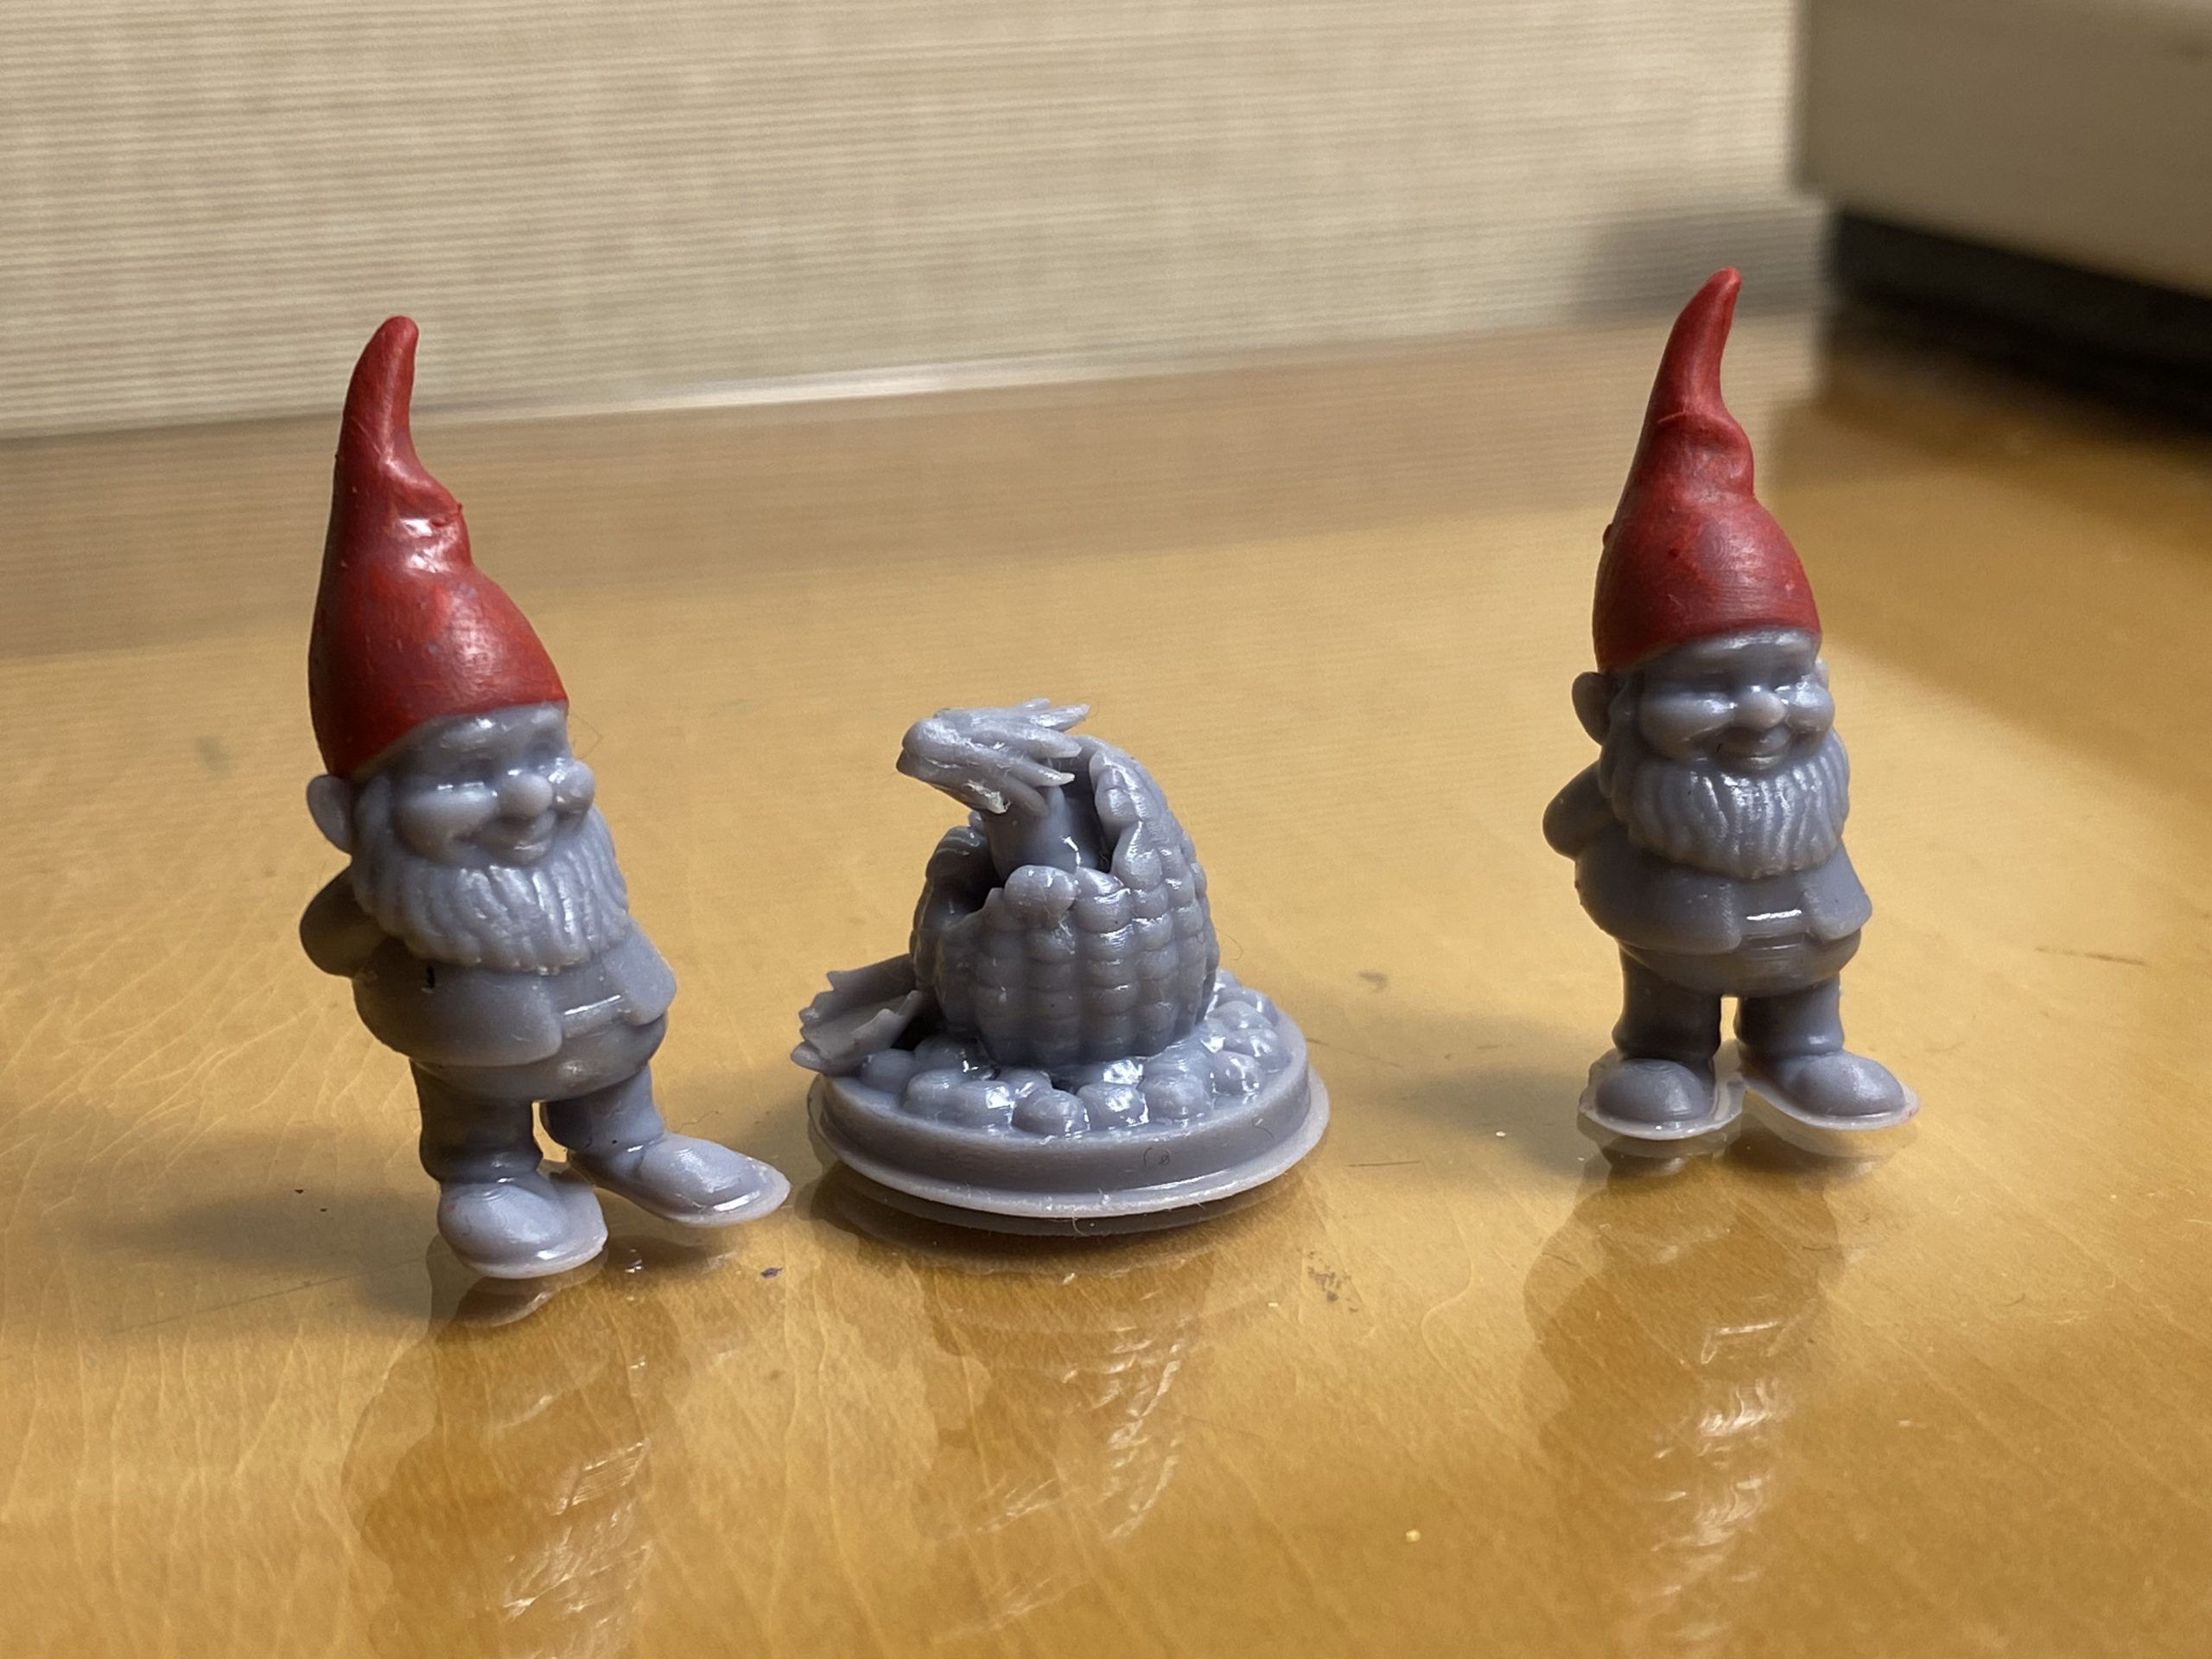 Two small gnomes and a dragon hatching from an egg, all 3D printed in grey, but the gnomes have had their hats painted red.